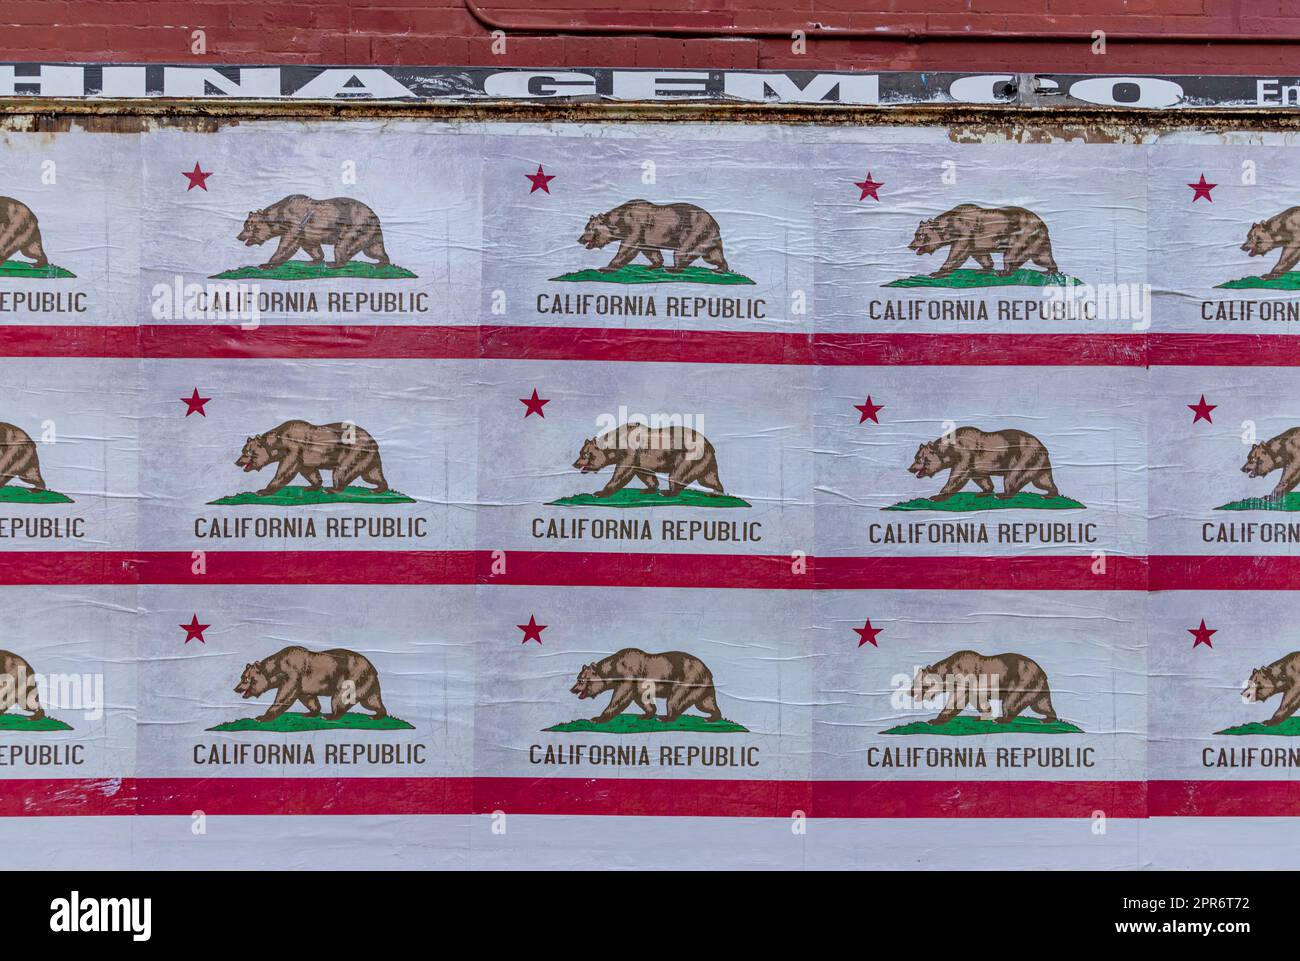 A picture of a wall with many California Republic flags posted on it. Stock Photo